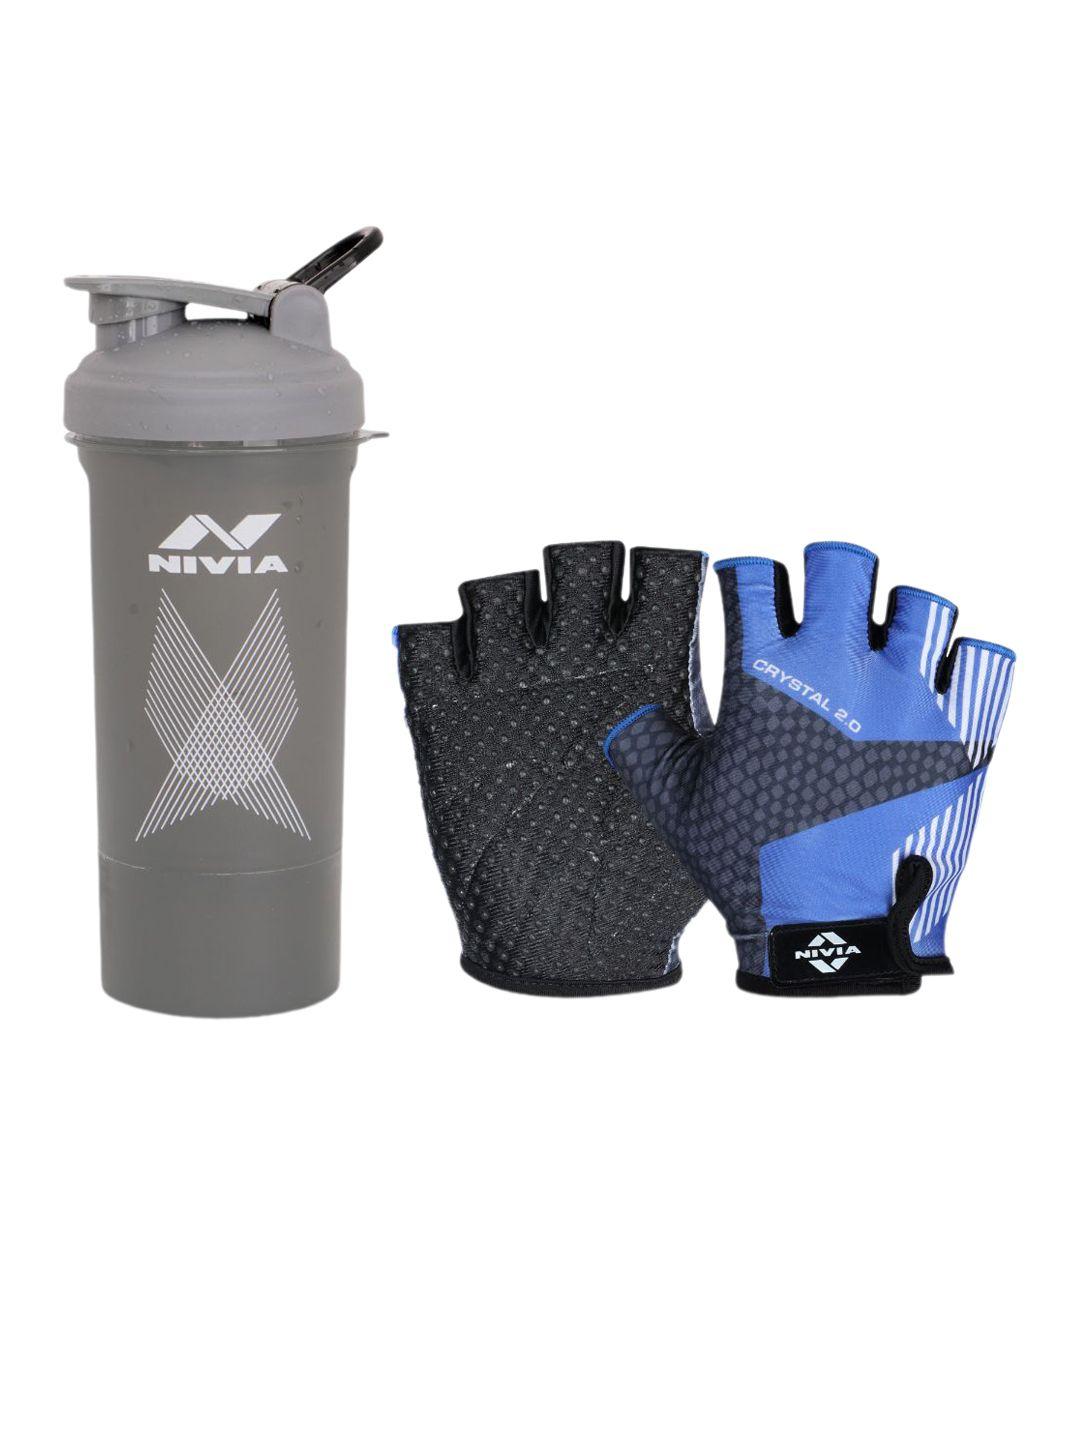 nivia printed leather gym gloves with shaker